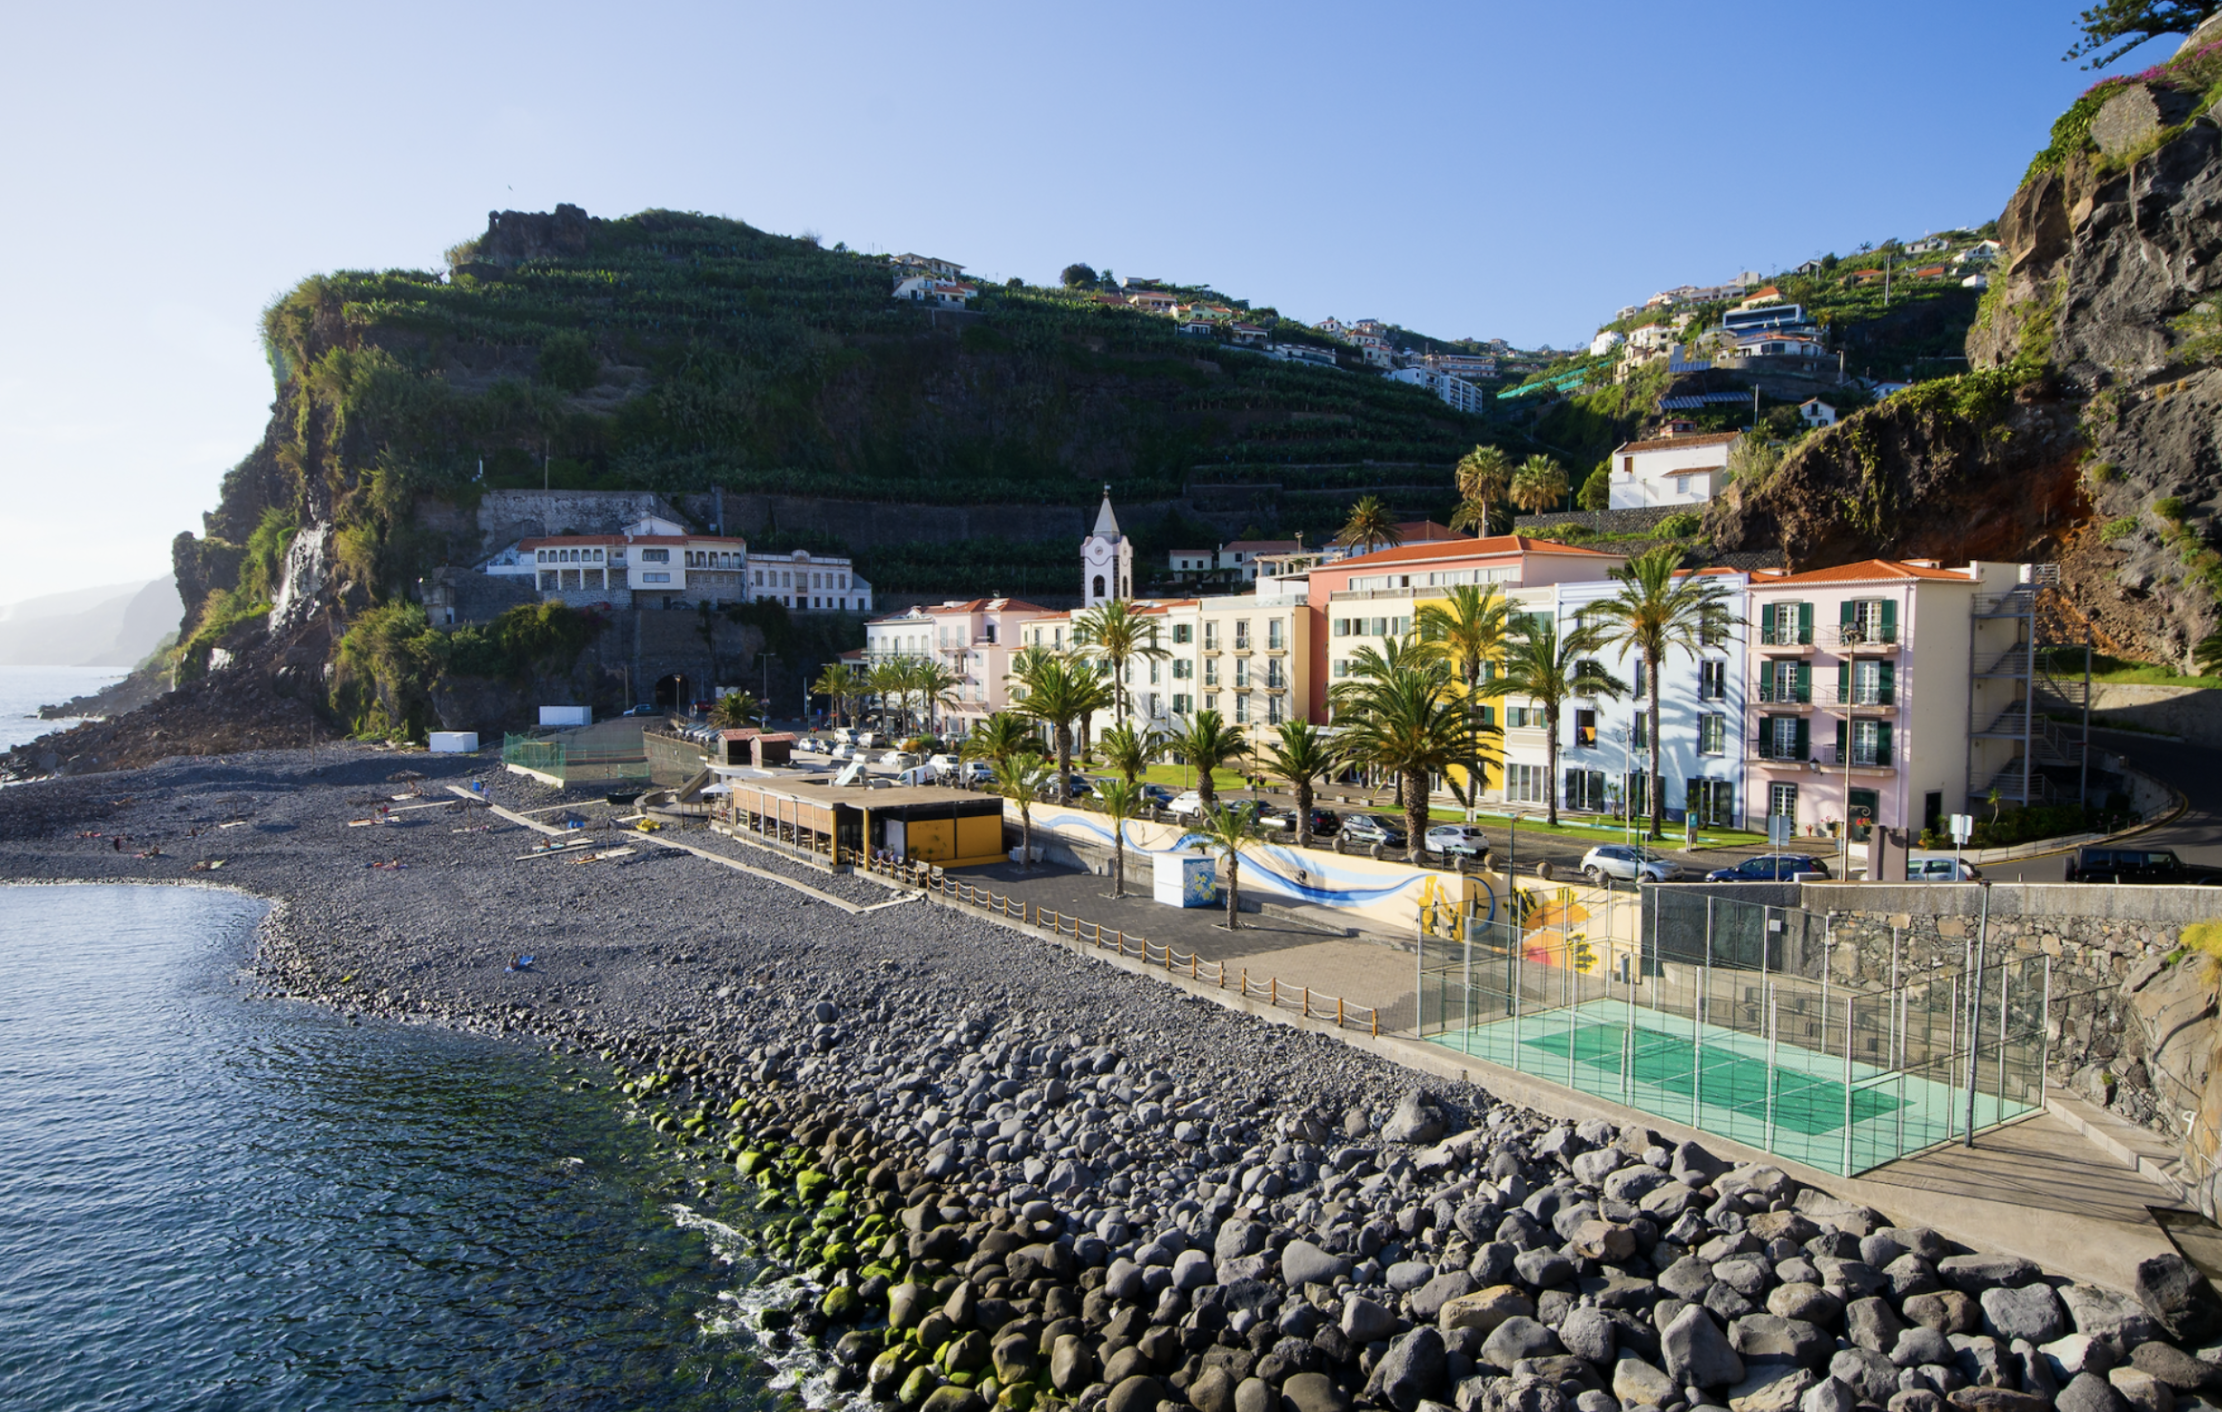 Colorful buildings line the waterfront in Madeira, Portugal